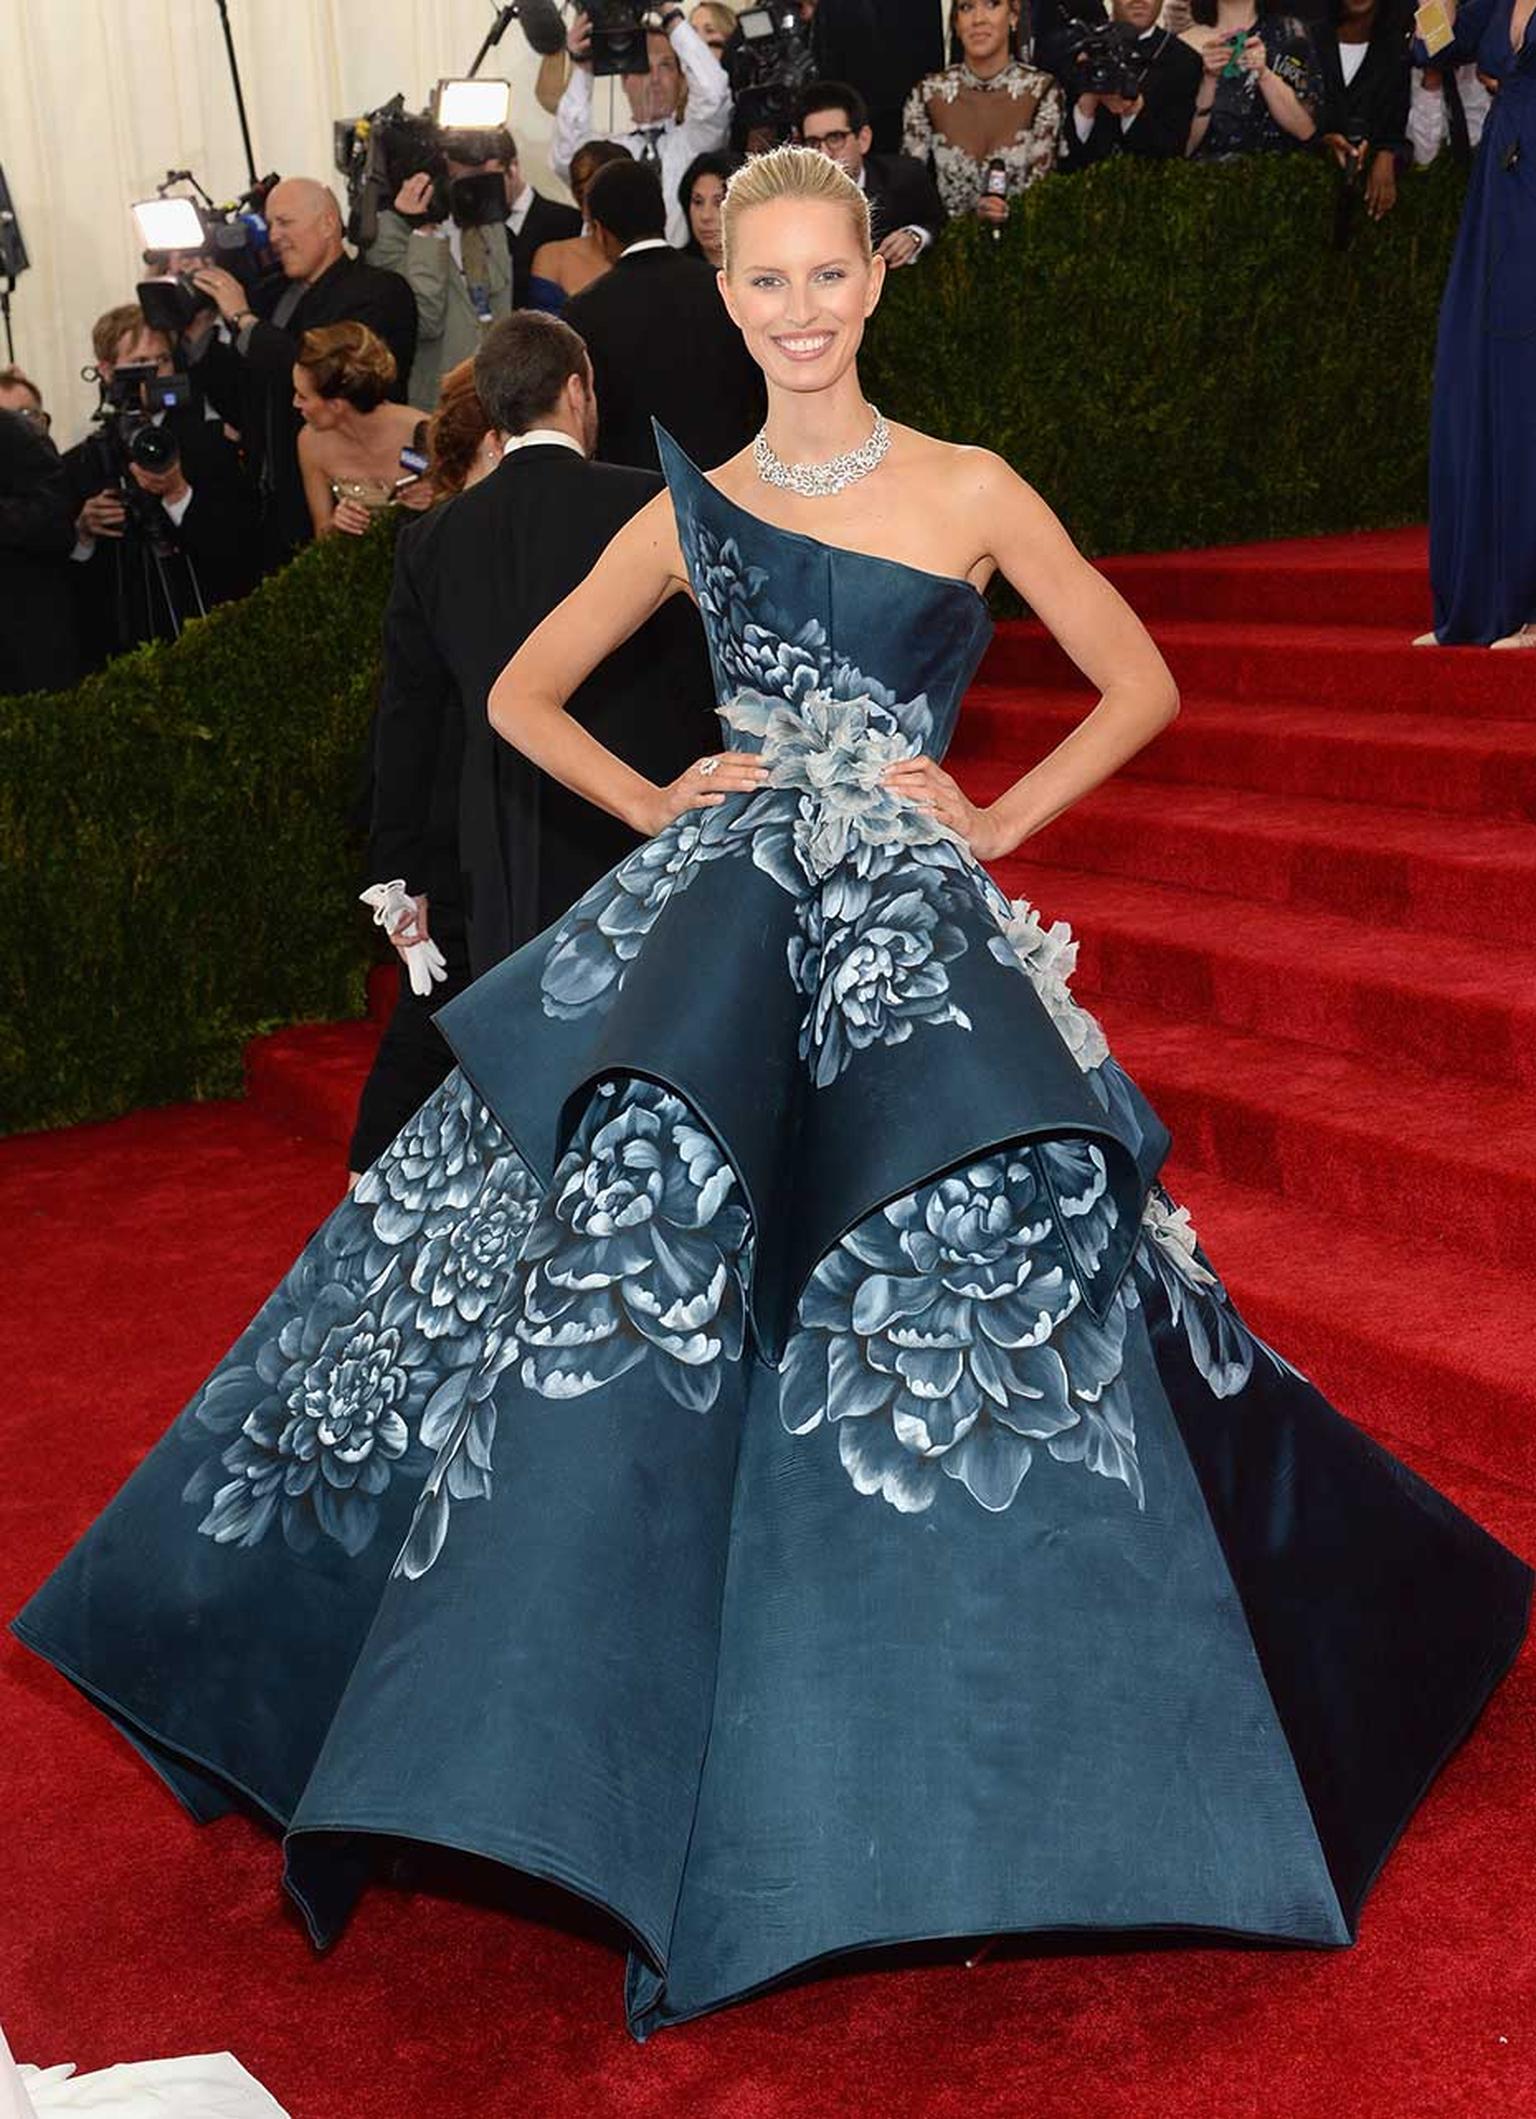 orerunner for the Met Ball 2014 best dressed award, model of the moment Karolina Kurkova was angular perfection in a Marchesa gown, paired with a 55-carat Guipure diamond necklace and Queen Diamond ring, both by Harry Winston and together worth more than 